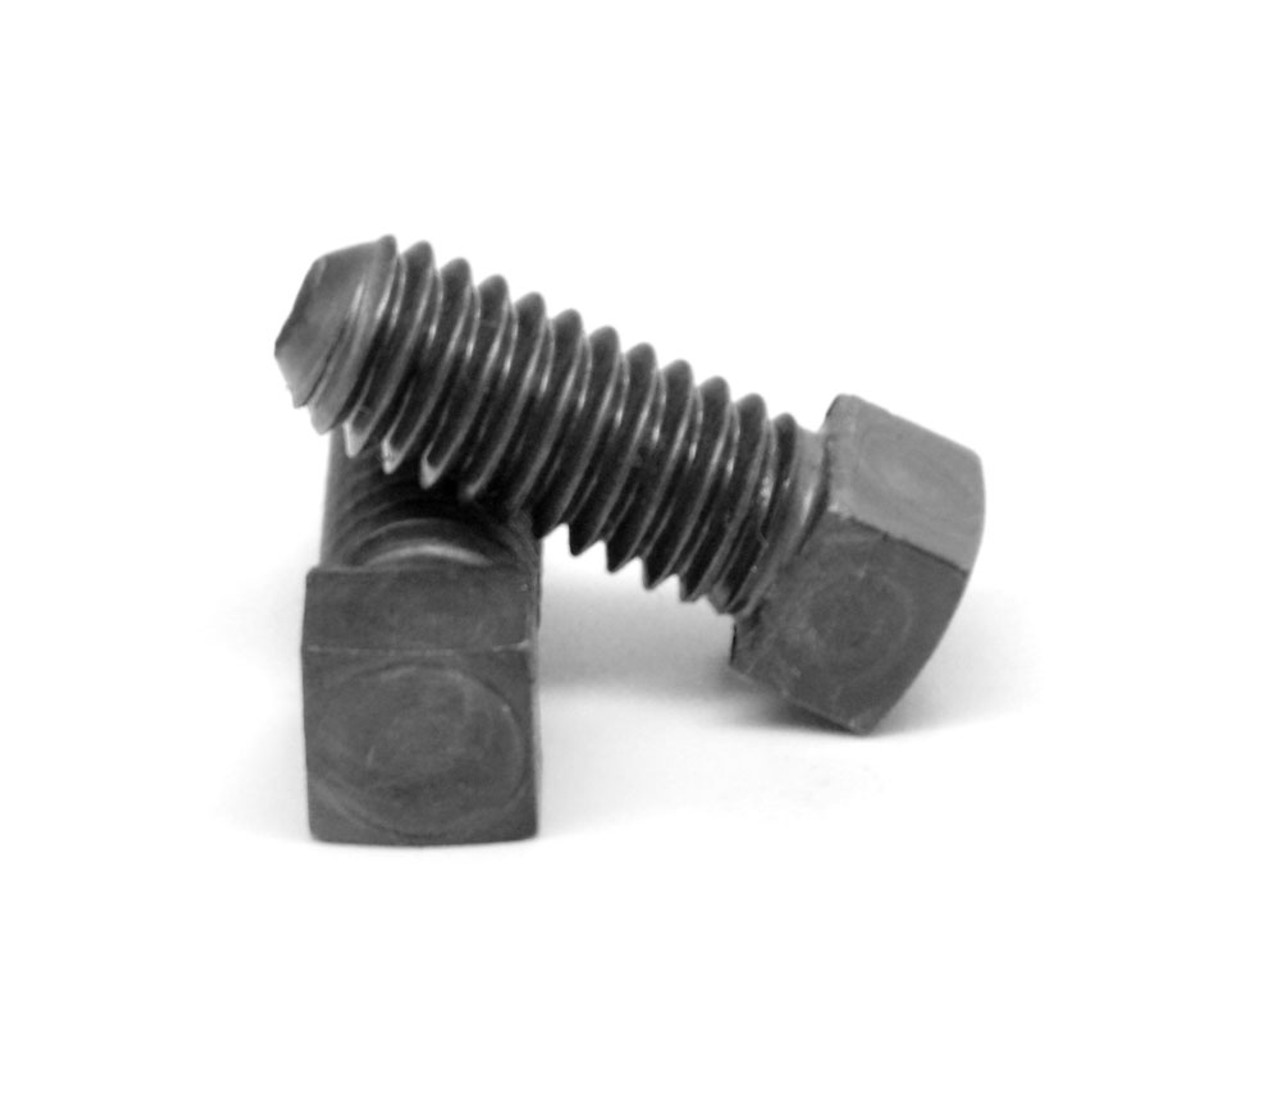 5/16"-18 x 1 1/2" (FT) Coarse Thread Square Head Set Screw Cone Point Low Carbon Steel Case Hardened Plain Finish